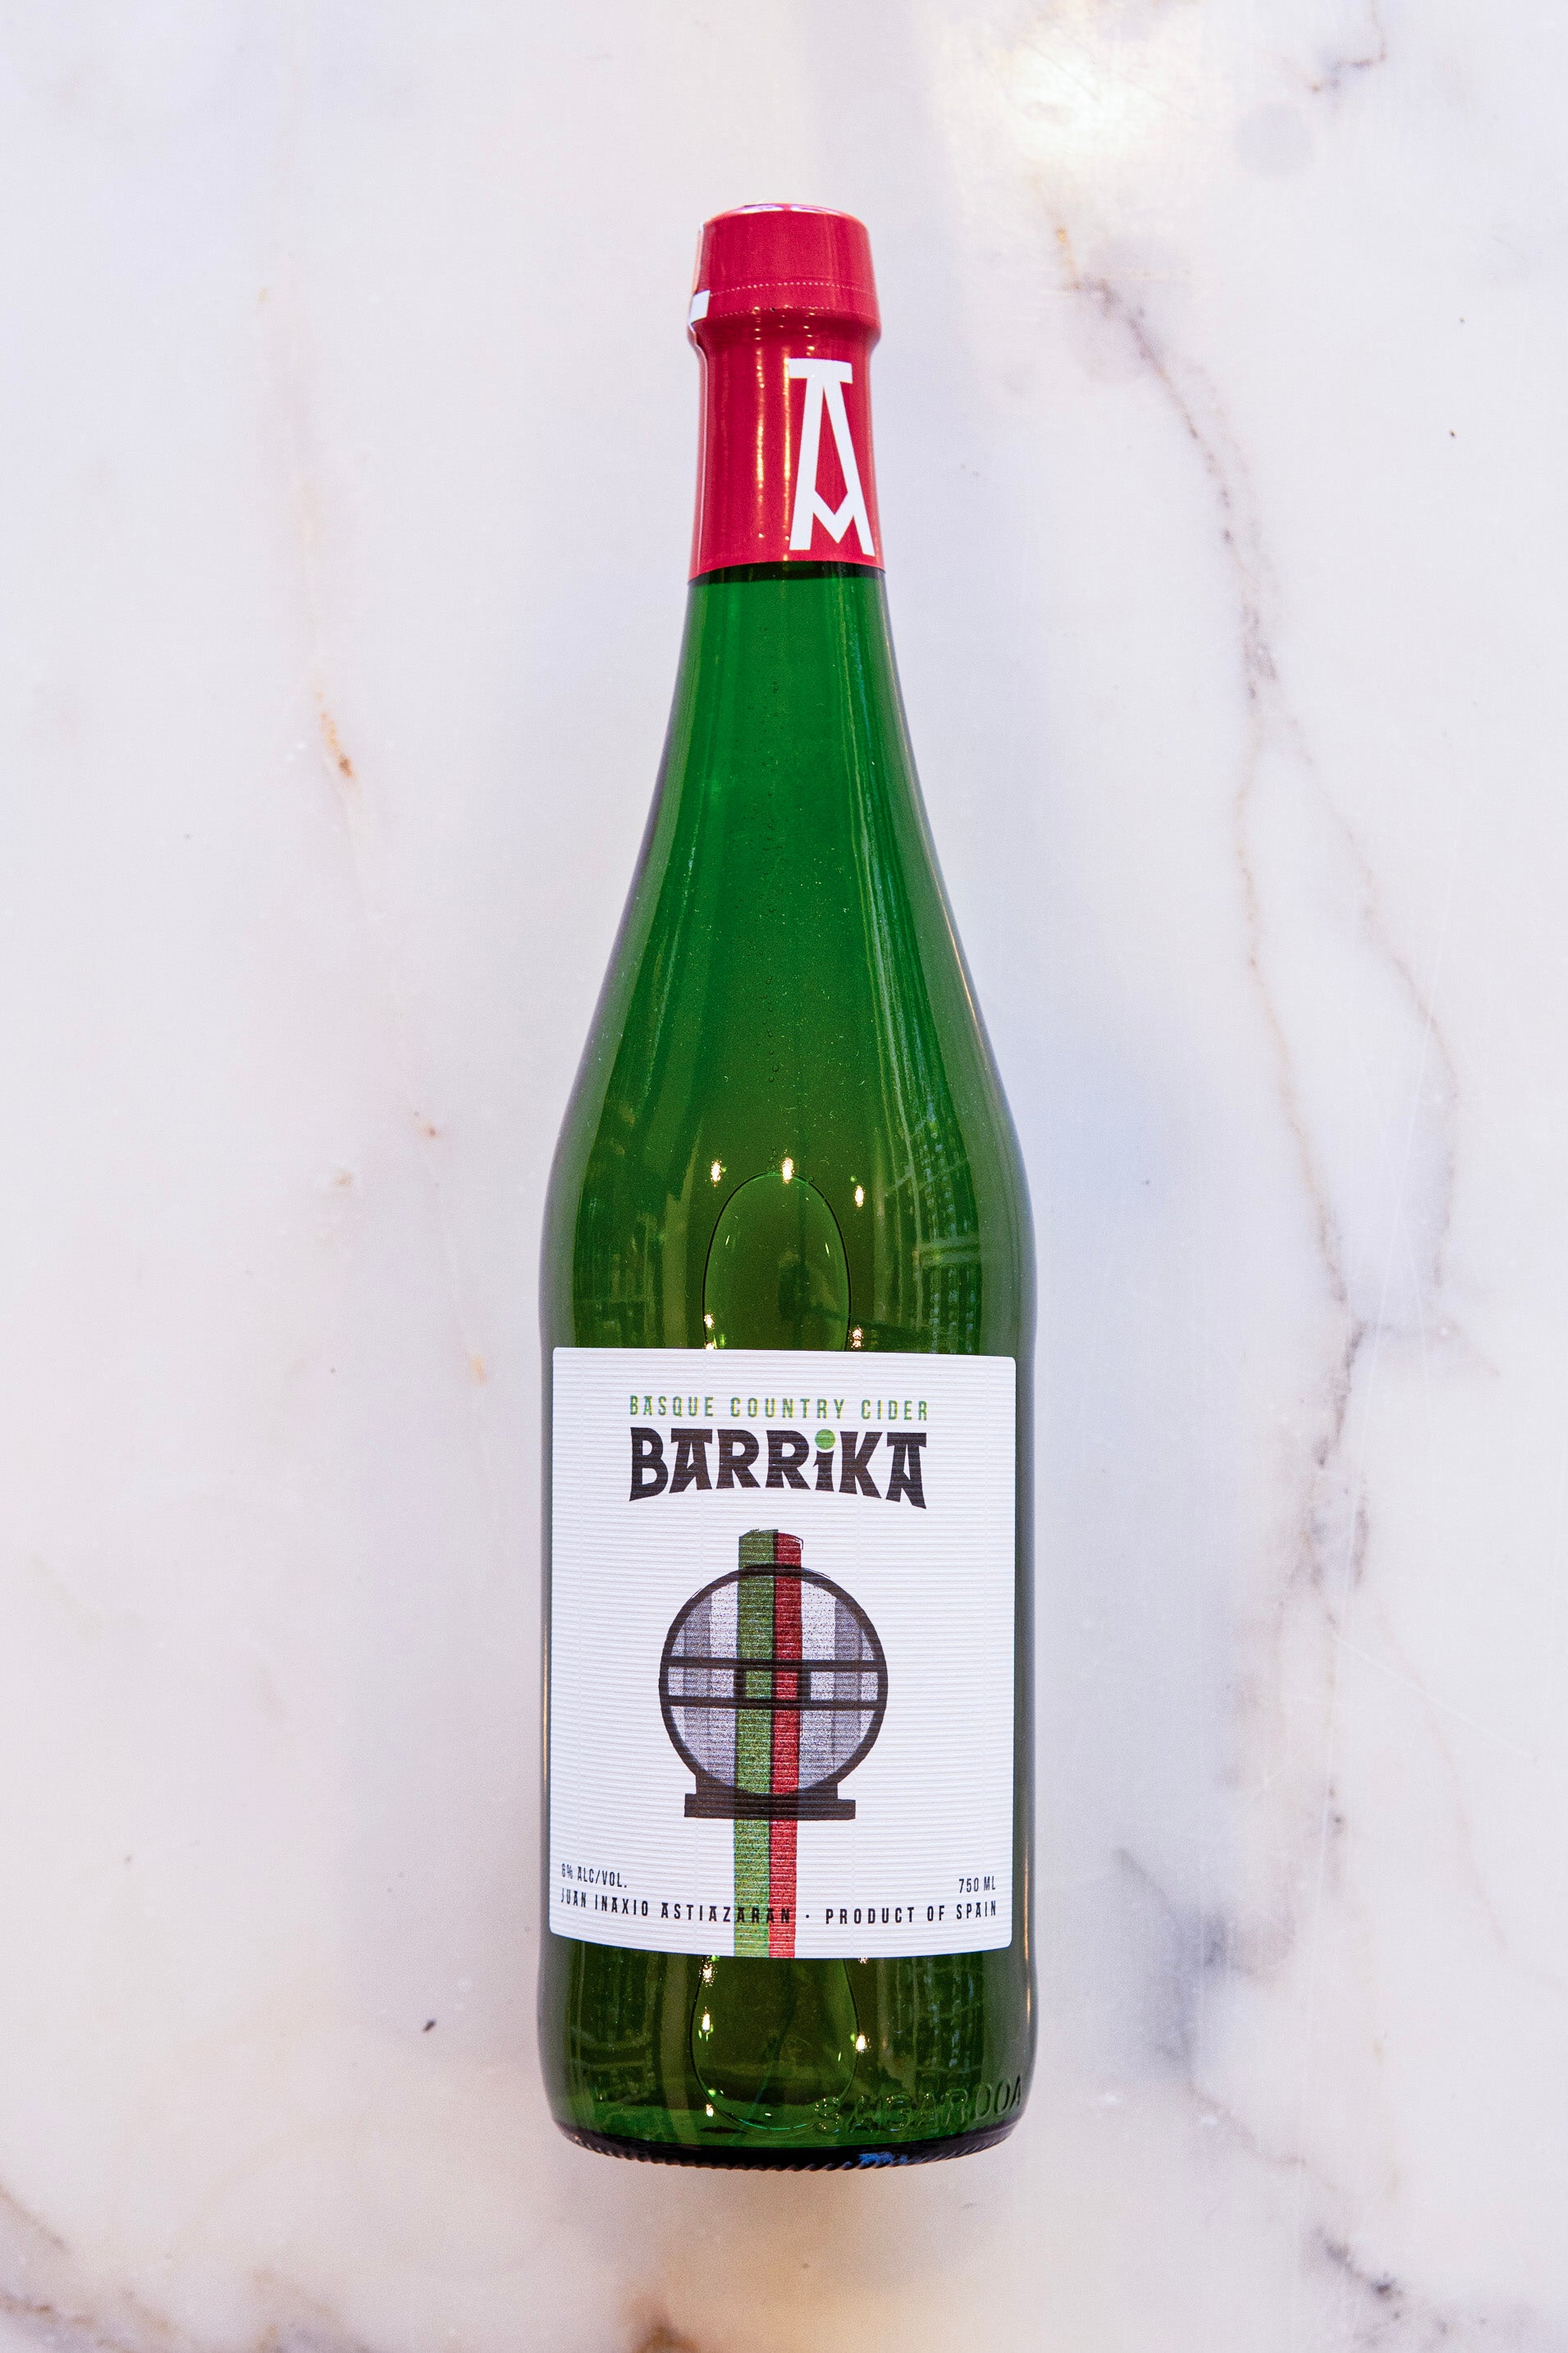 Barrika Basque Country Cider